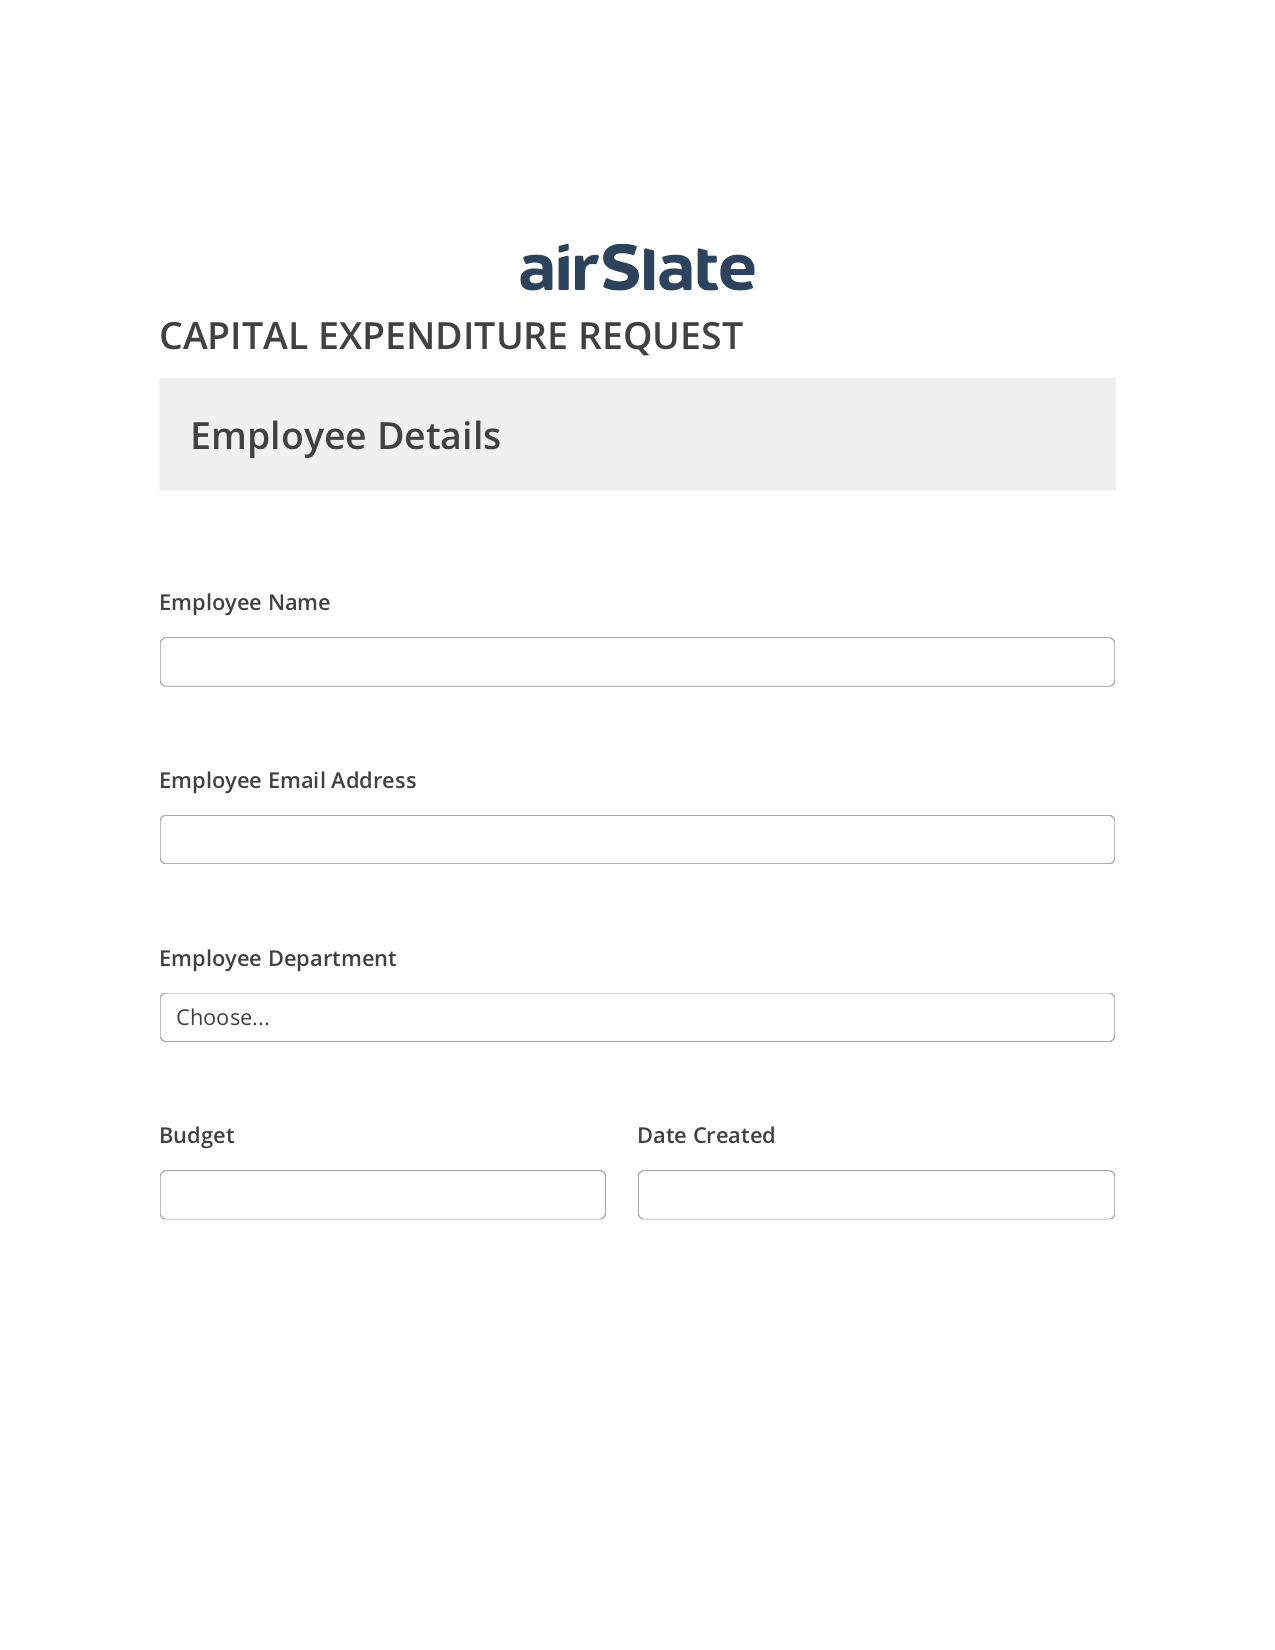 Capital Expenditure Request Approval Workflow Pre-fill from MySQL Dropdown Options Bot, Create Slate Reminder Bot, Archive to SharePoint Folder Bot